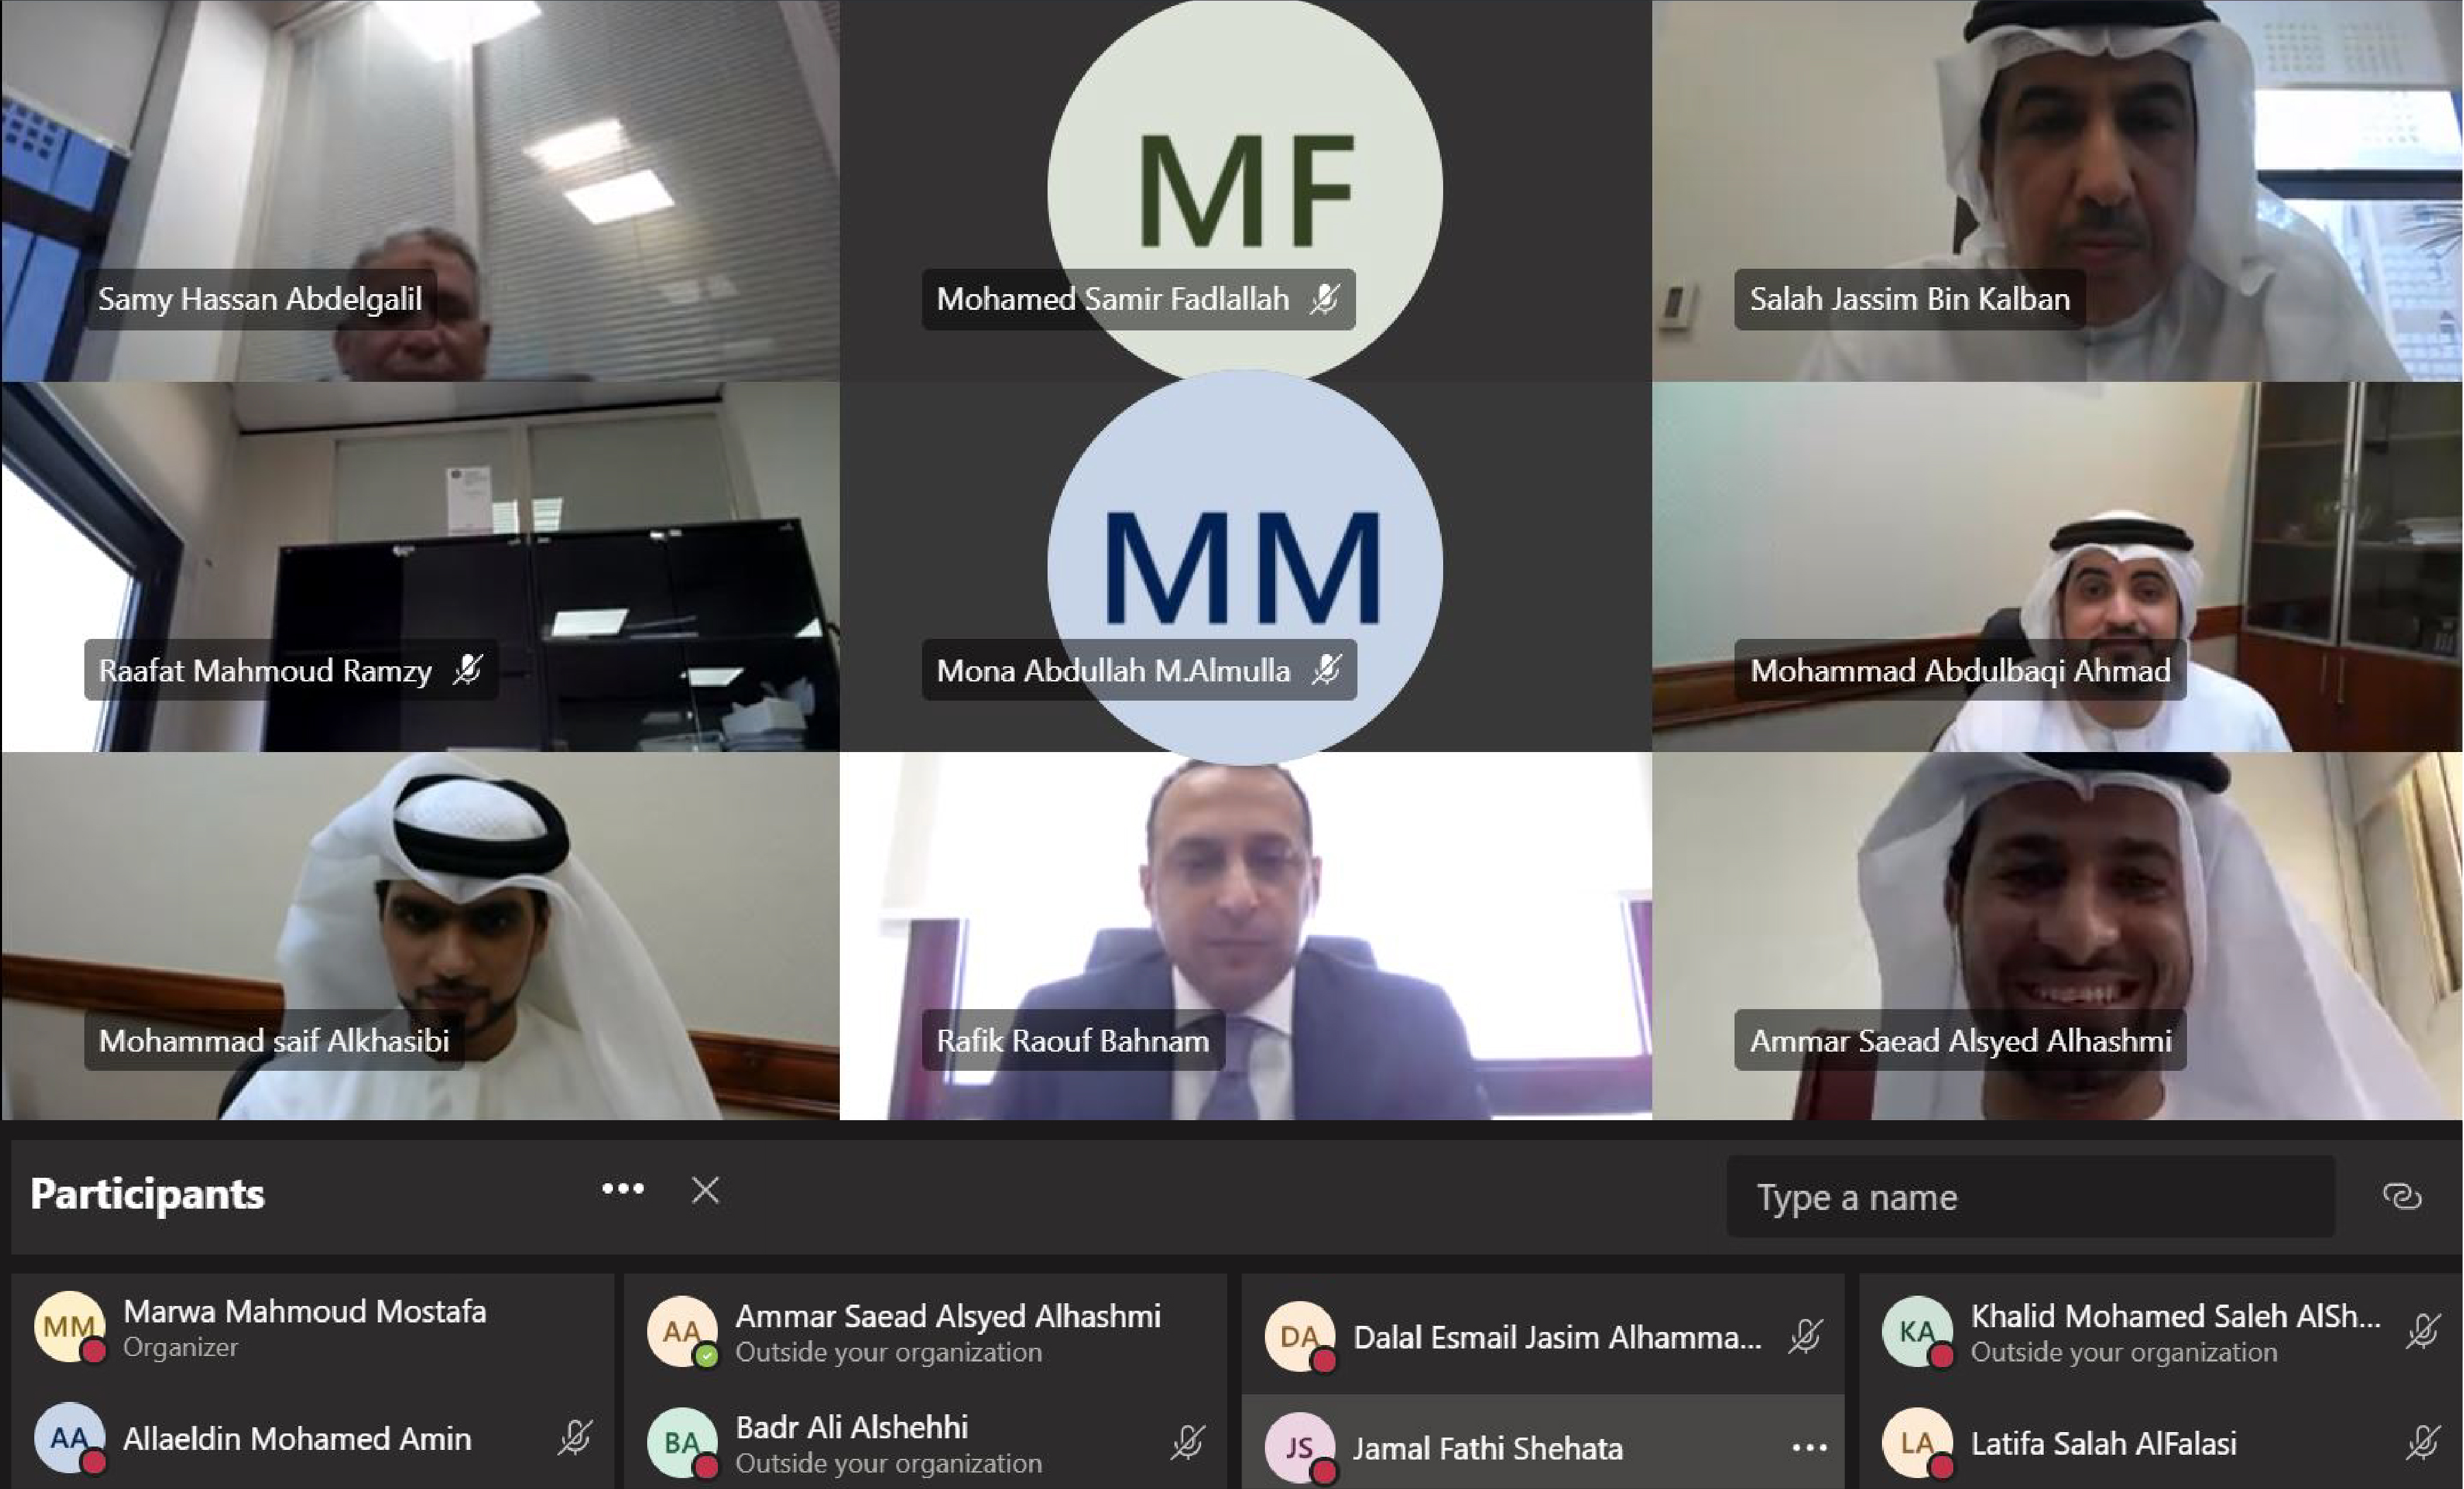 Dubai Legal and Dubai Courts Discuss Remotely the Development of the Procedures for Dealing with Government Claims